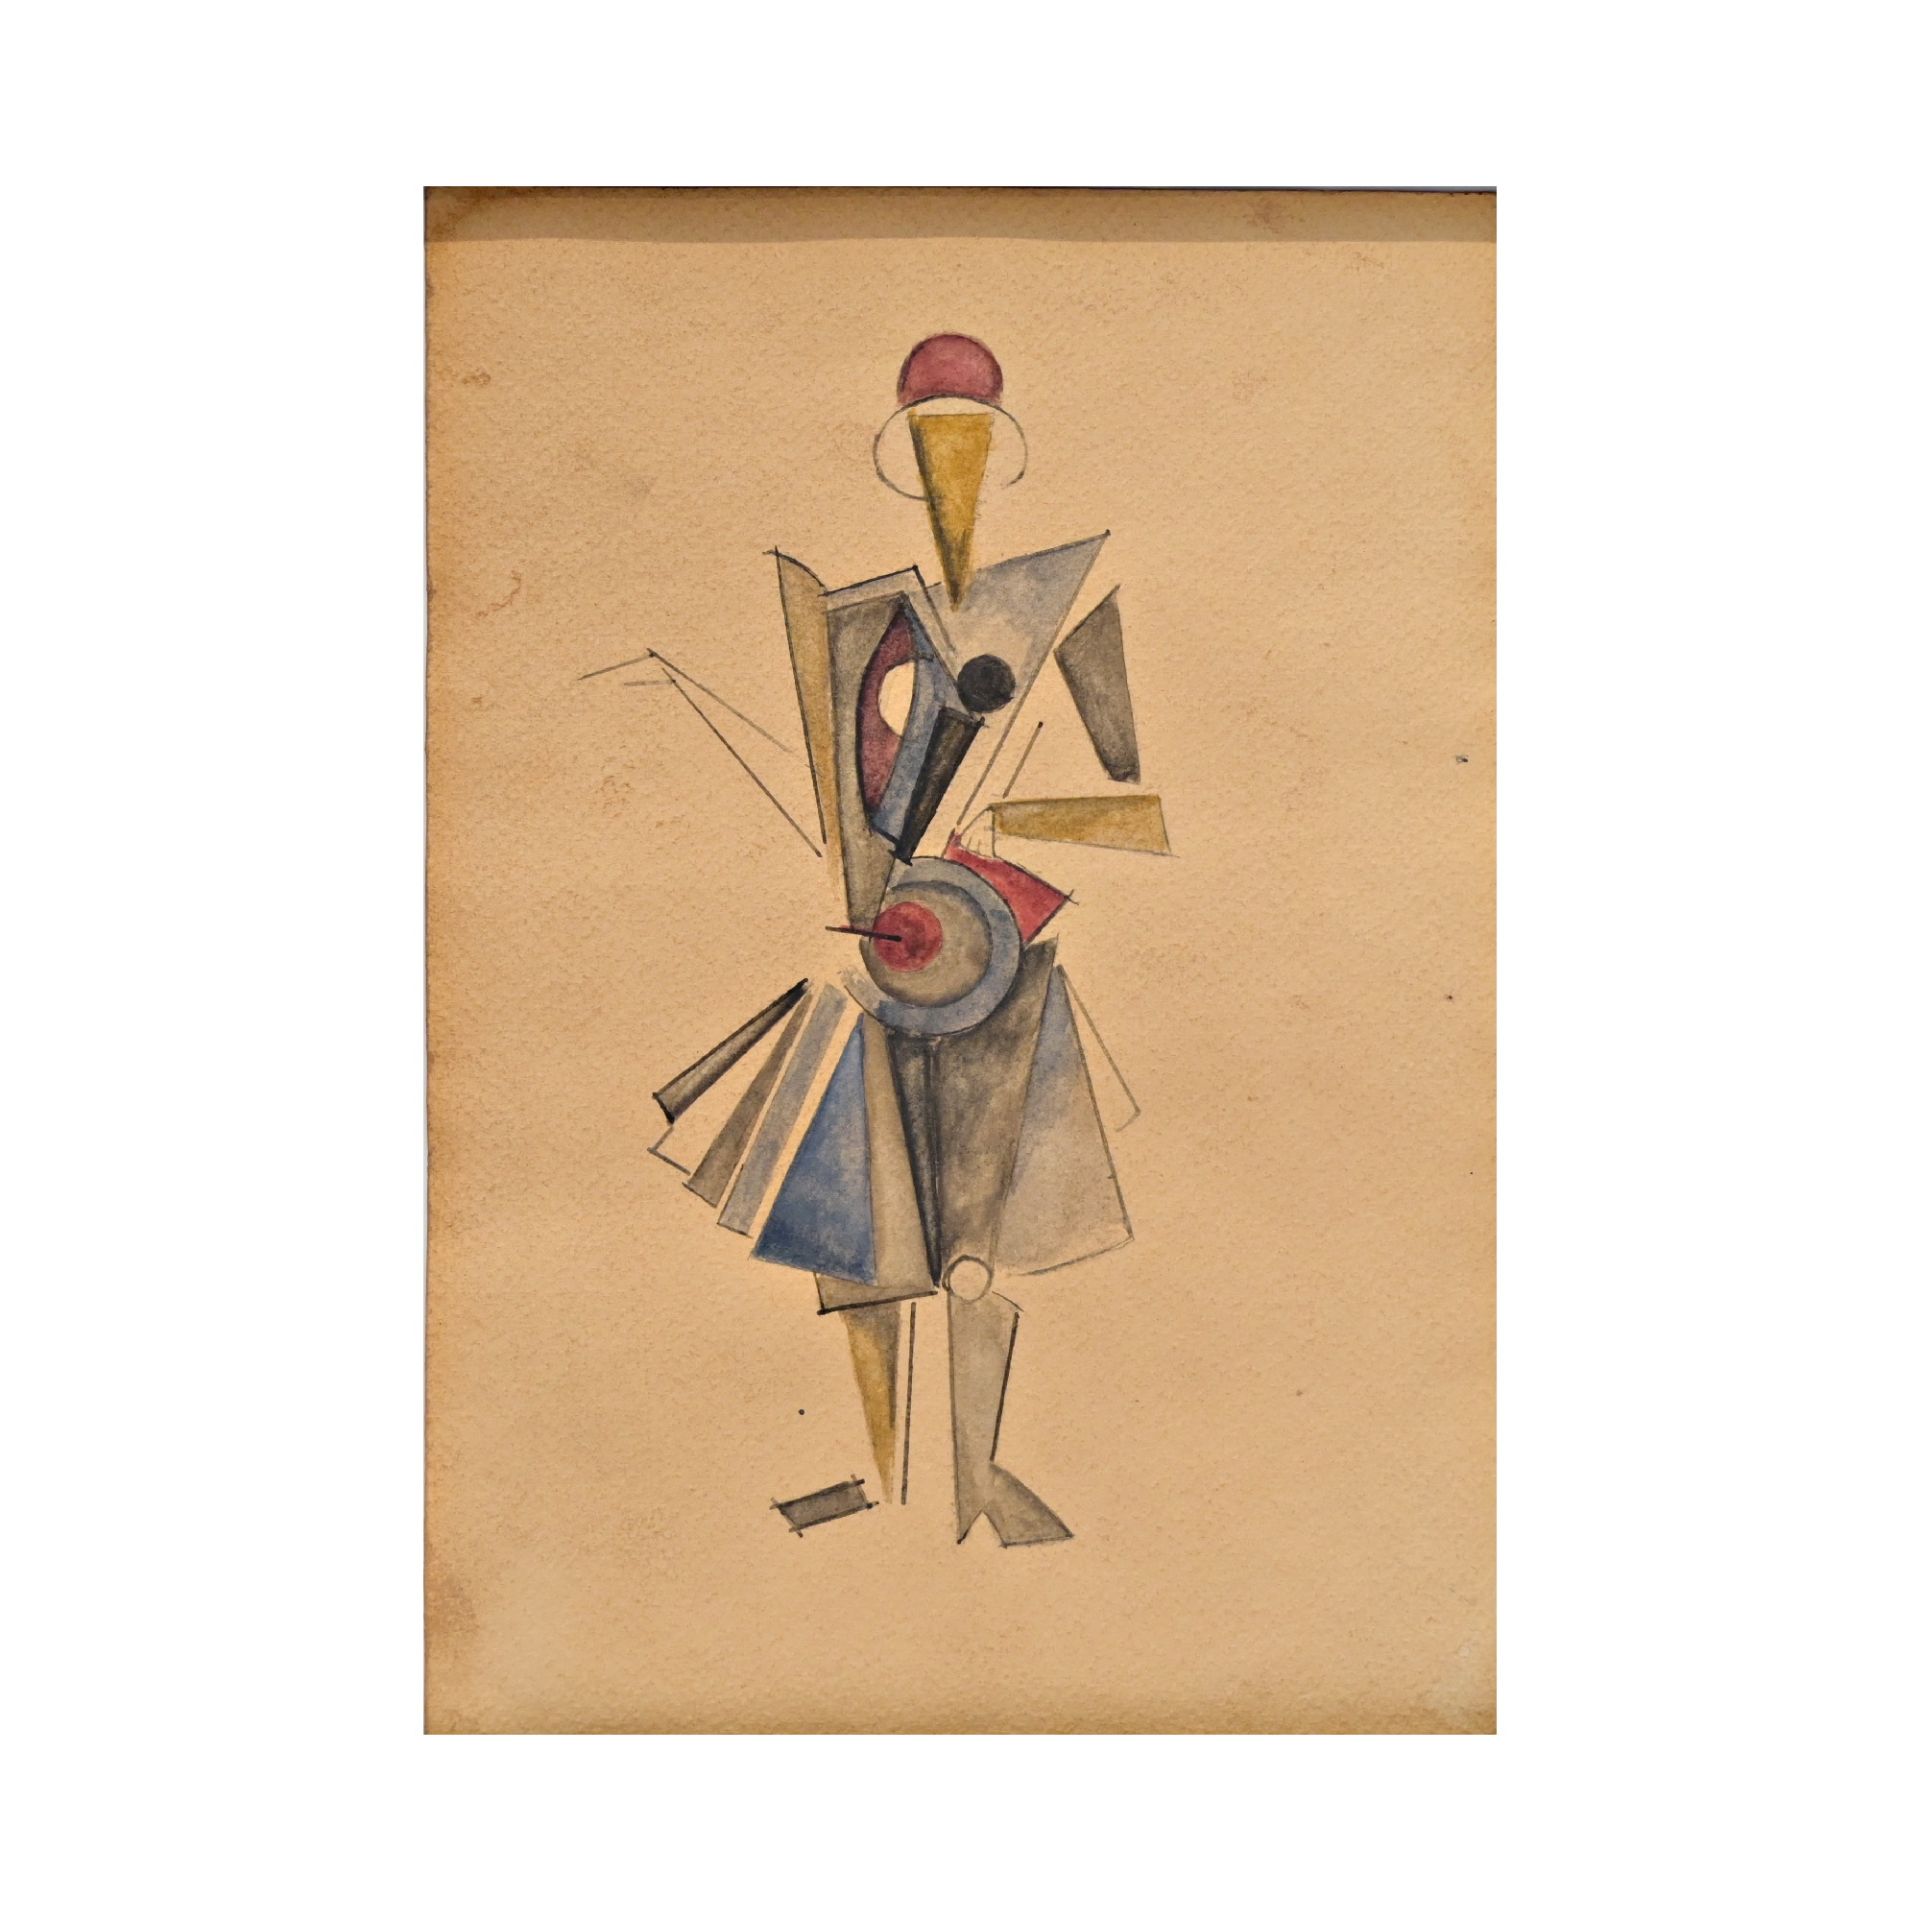 Alexander RODCHENKO (1891-1956) "Costume Design", watercolor on paper, signed by A. Rodchenko No. 77